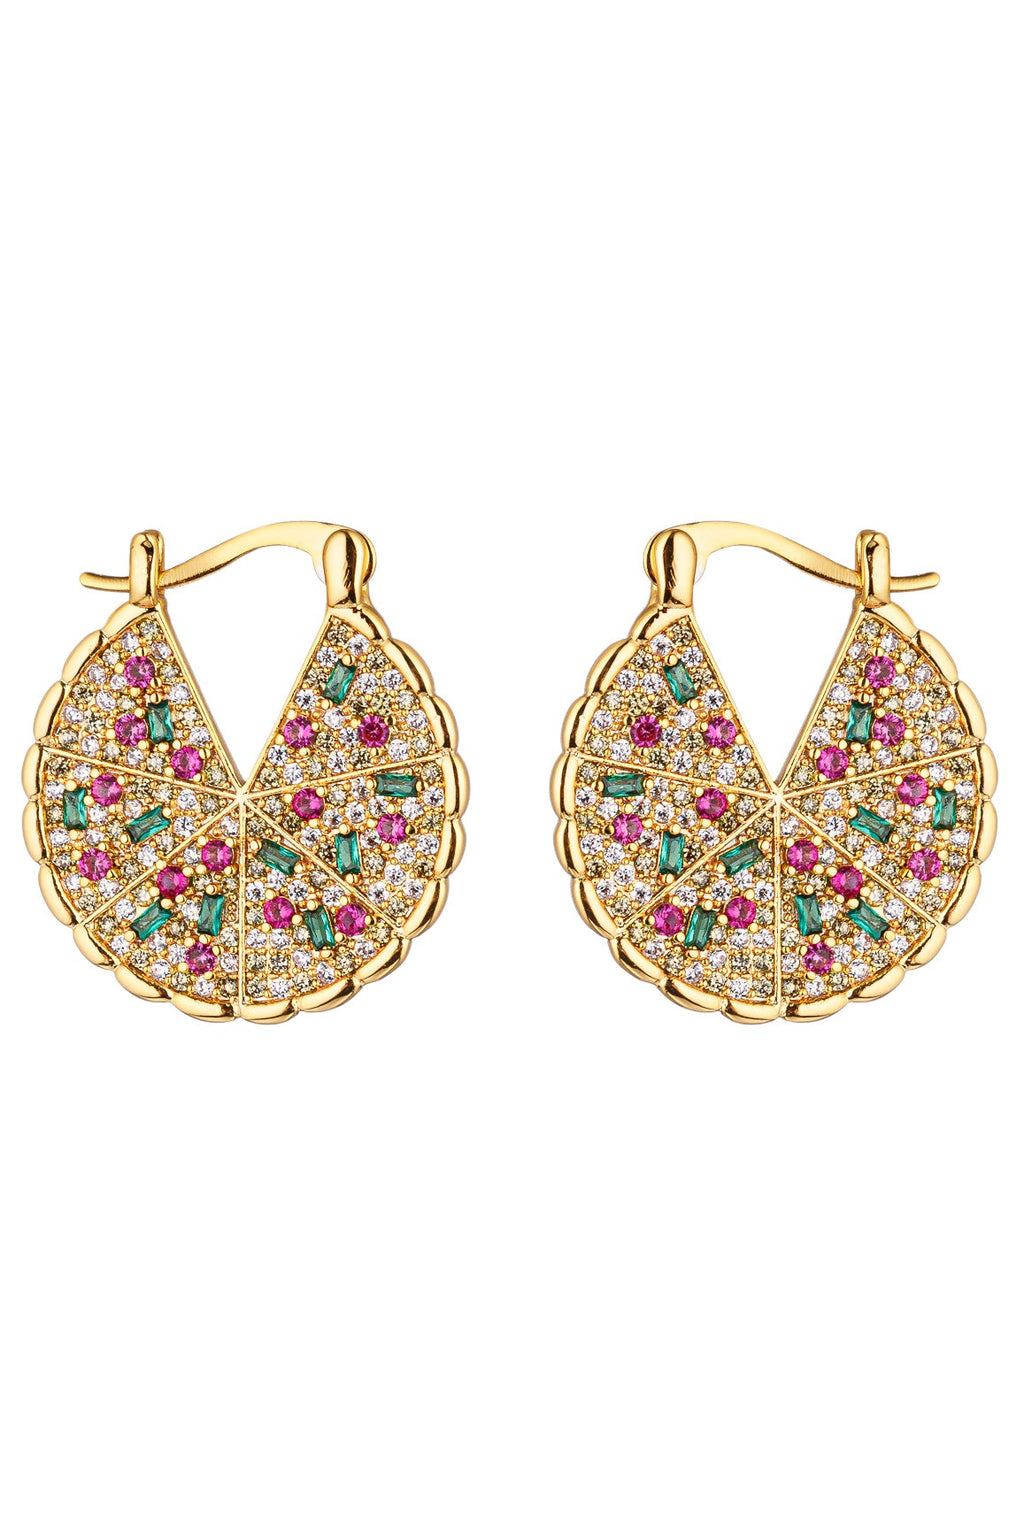 Show Your Love for Pizza with Pizza To My Heart CZ Loop Earrings in Gold Tone.